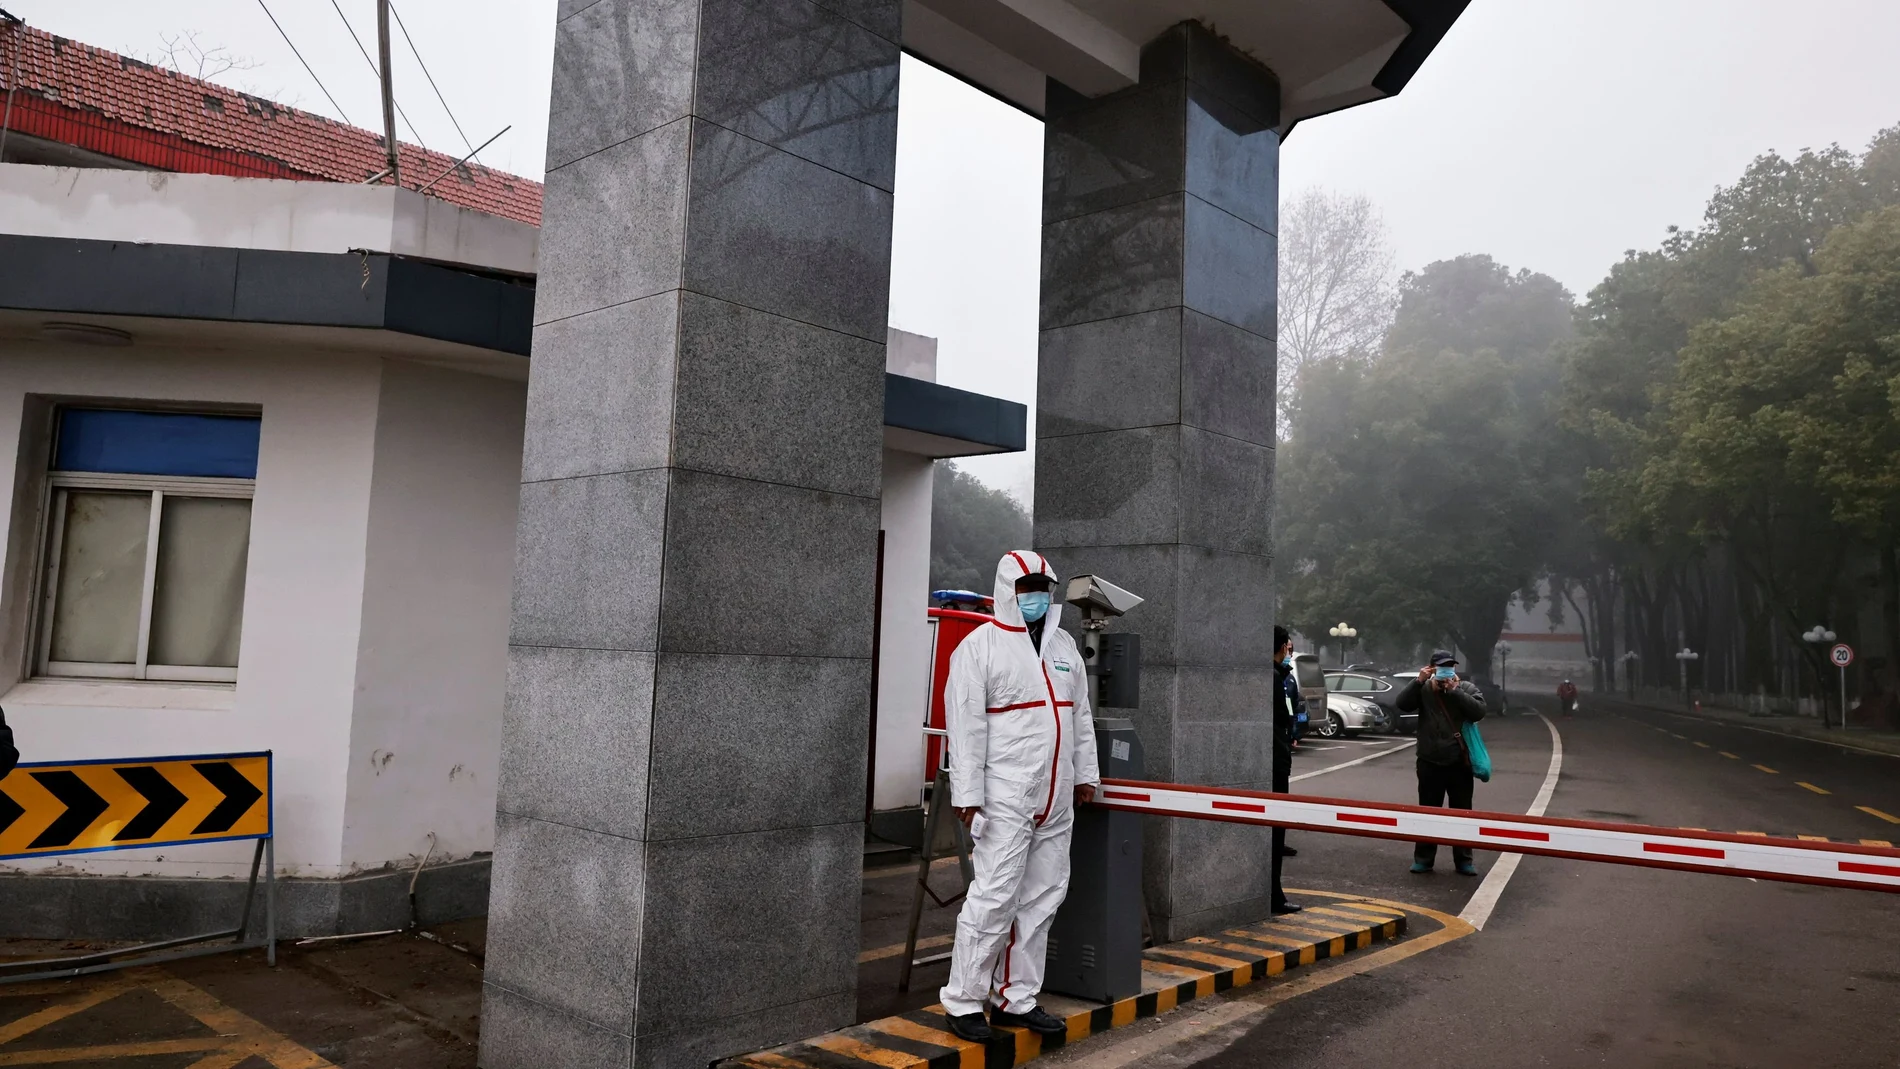 Security personnel look on during the visit by members of the World Health Organization (WHO) team tasked with investigating the origins of the coronavirus disease (COVID-19), at the Hubei provincial center for disease control in Wuhan, China February 1, 2021. REUTERS/Thomas Peter